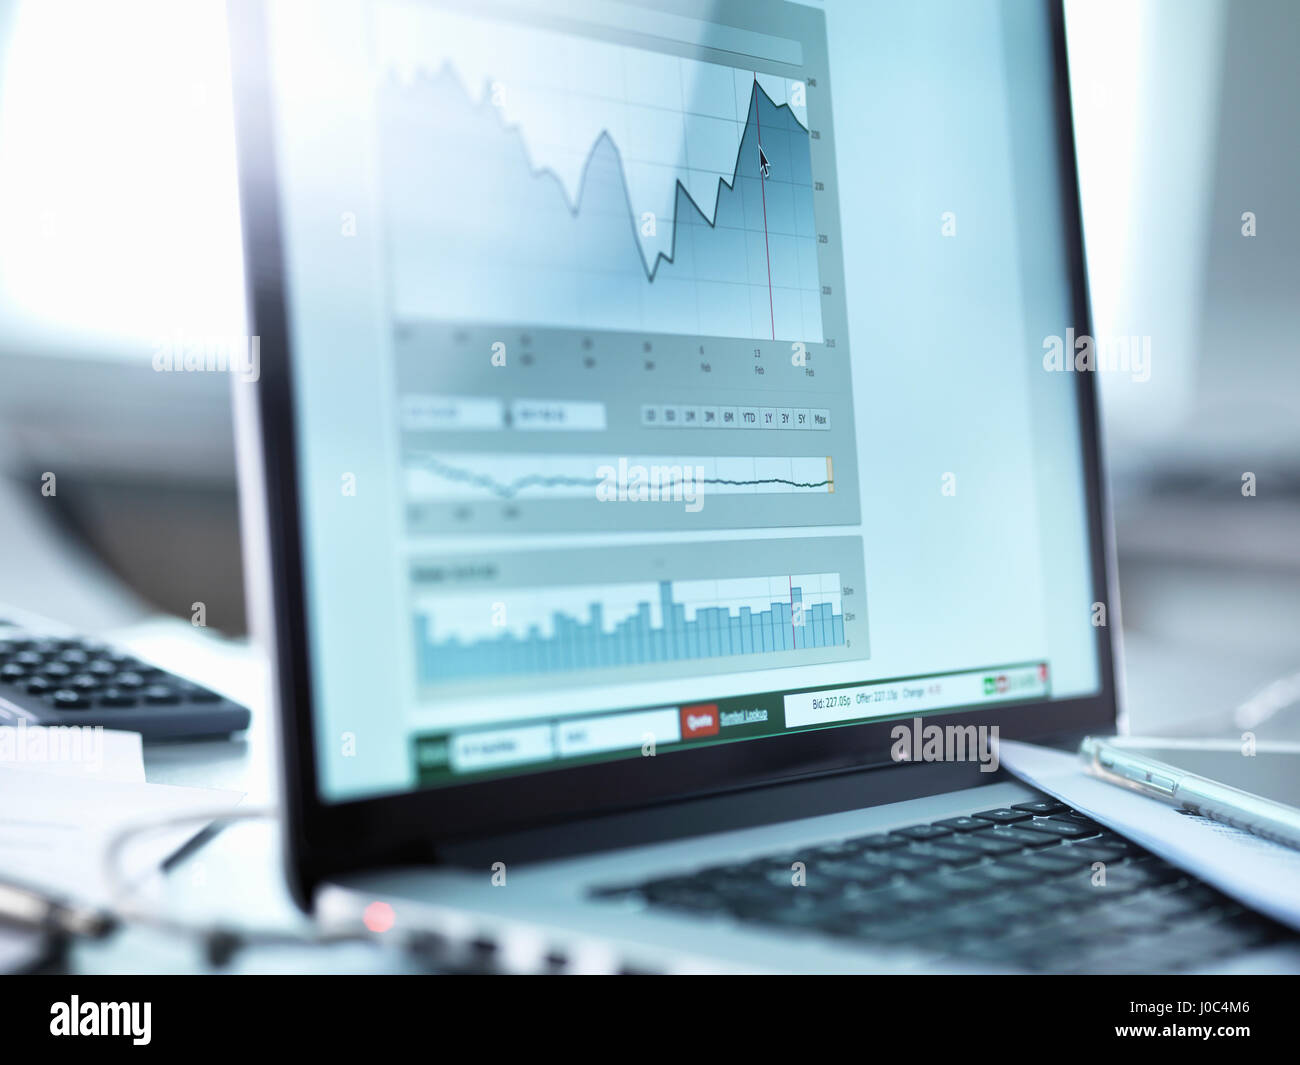 Share price data from investor's portfolio on a laptop computer screen Stock Photo